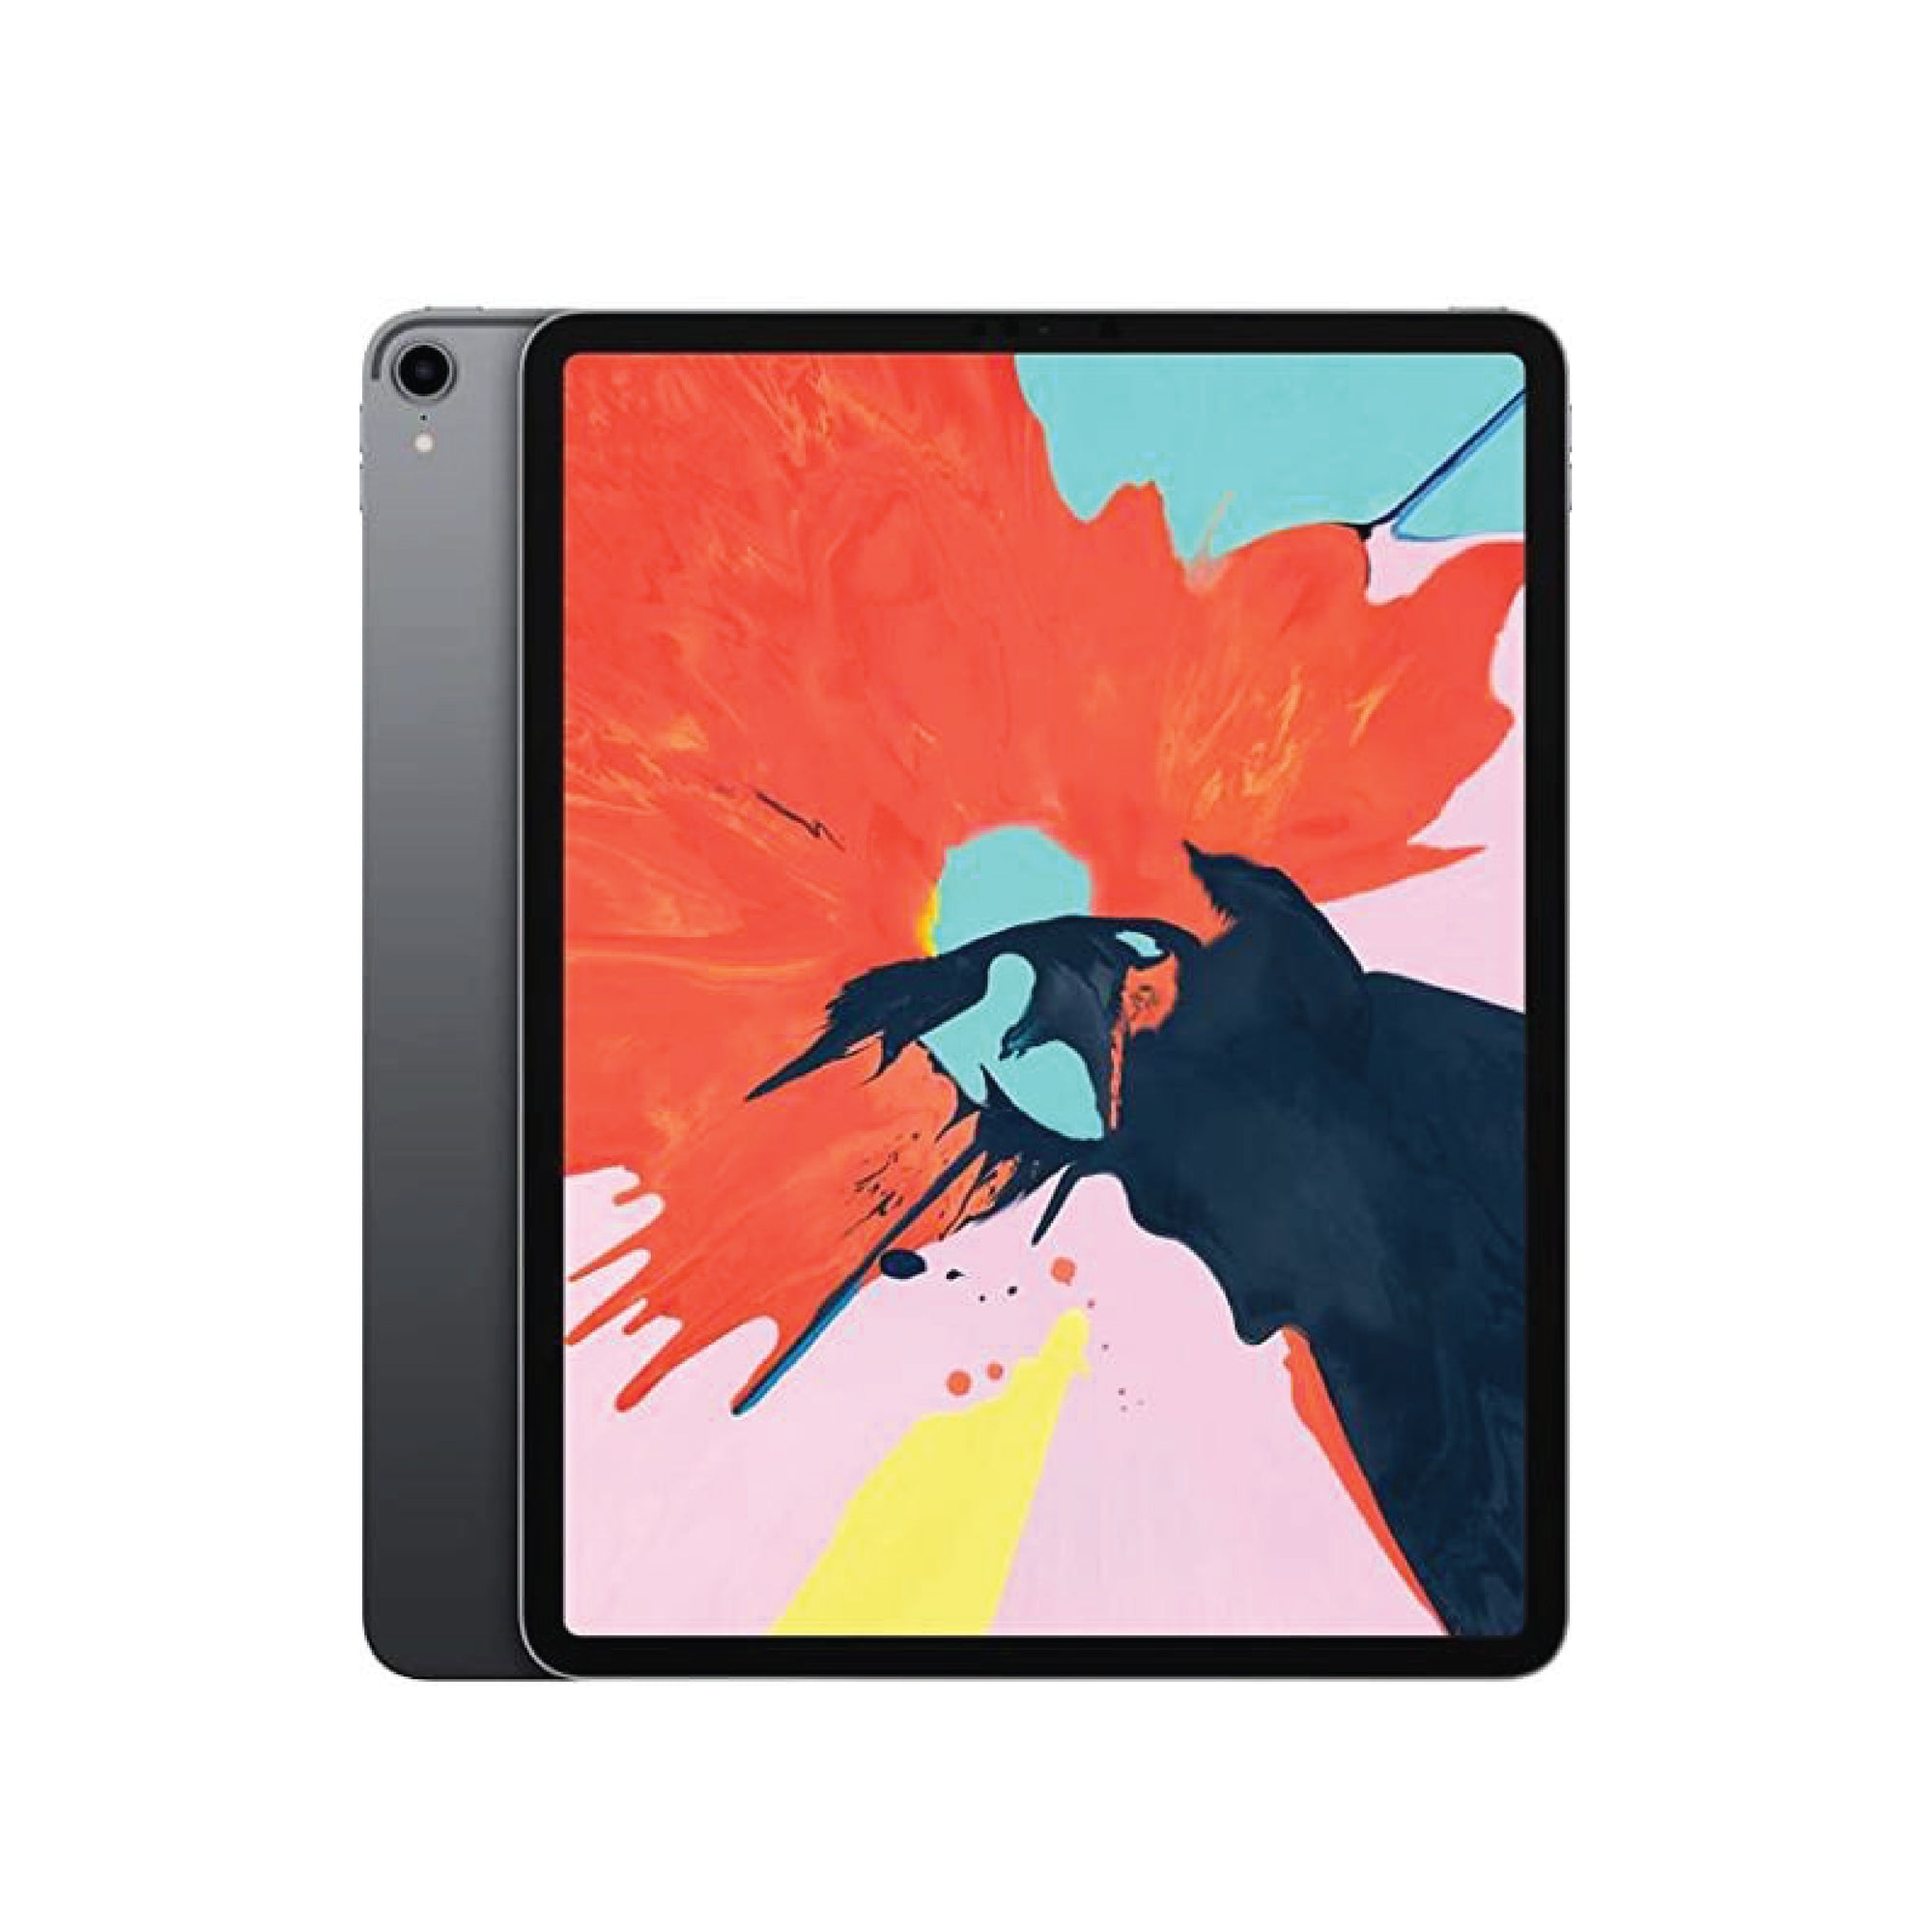 iPad Pro 12.9" 3rd Gen Battery Replacement